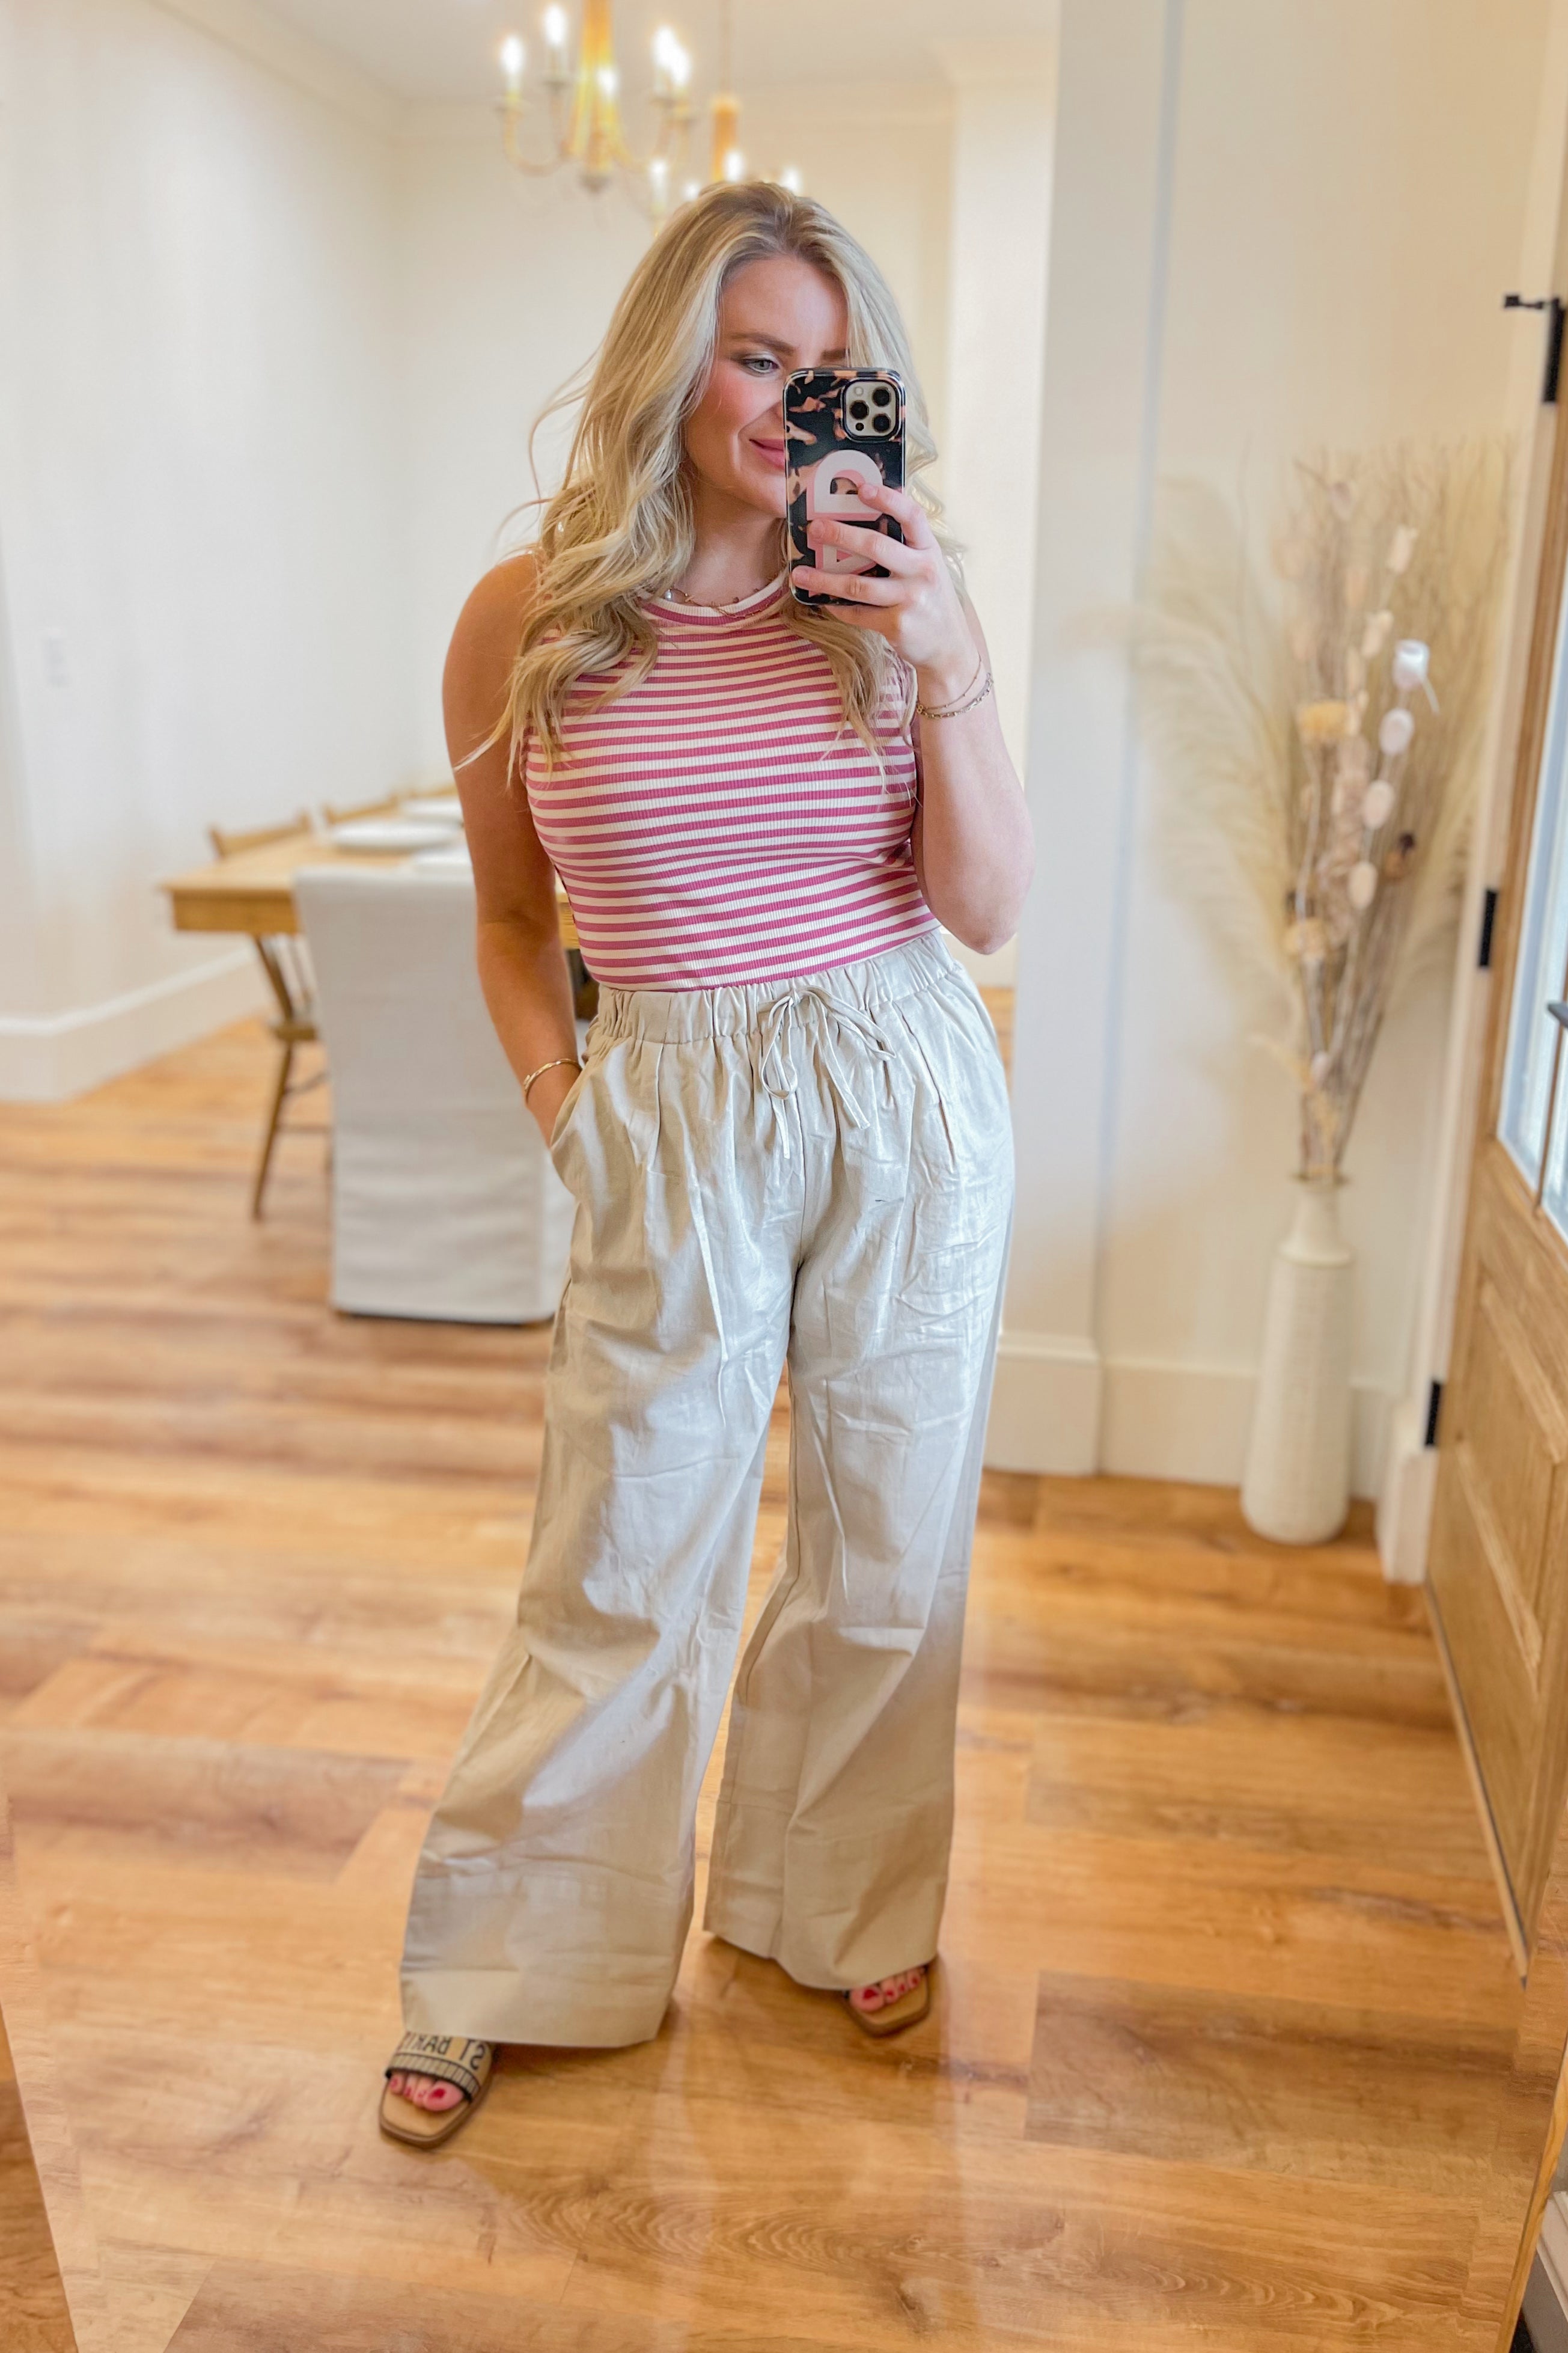 Winifred High Waisted Wide Leg Drawstring Waist Pants - Be You Boutique